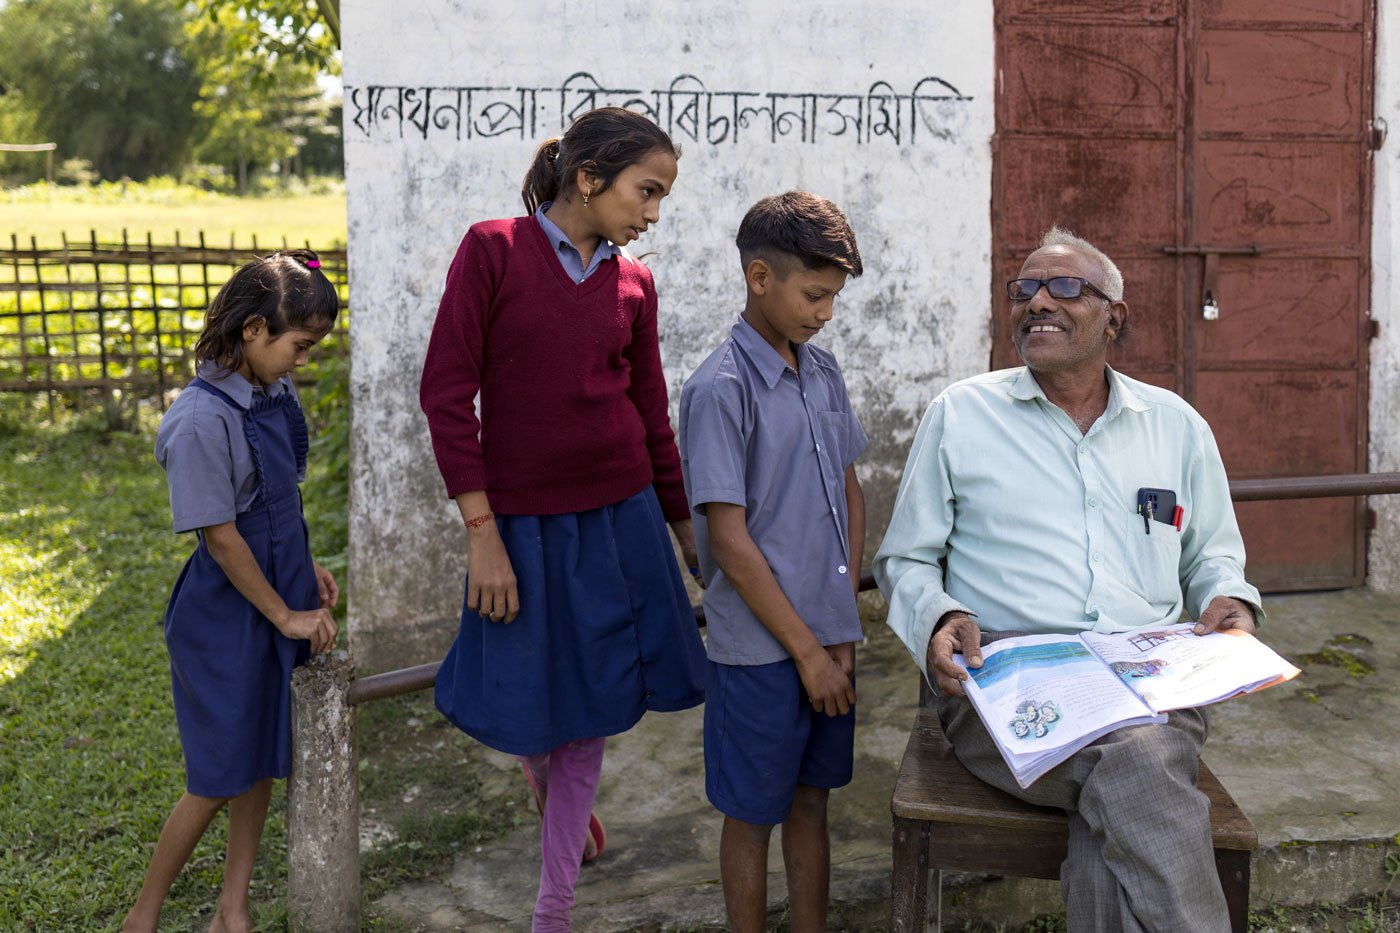 Siwjee (seated on the chair) with his students Gita Devi, Srirekha Yadav and Rajeev Yadav (left to right) on the school premises